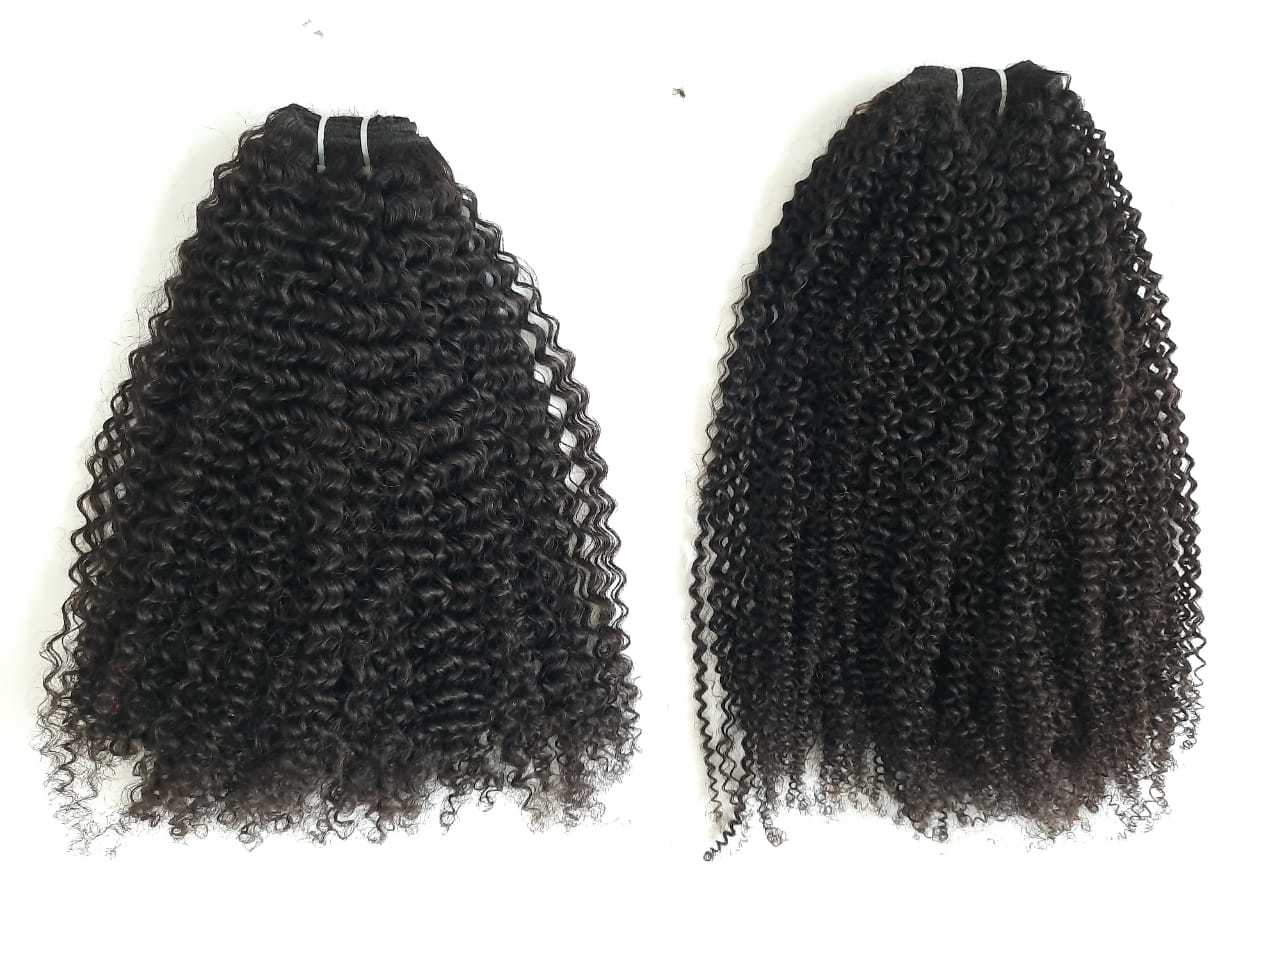 Steam Afro Kinky Curly Human hair,Afro style